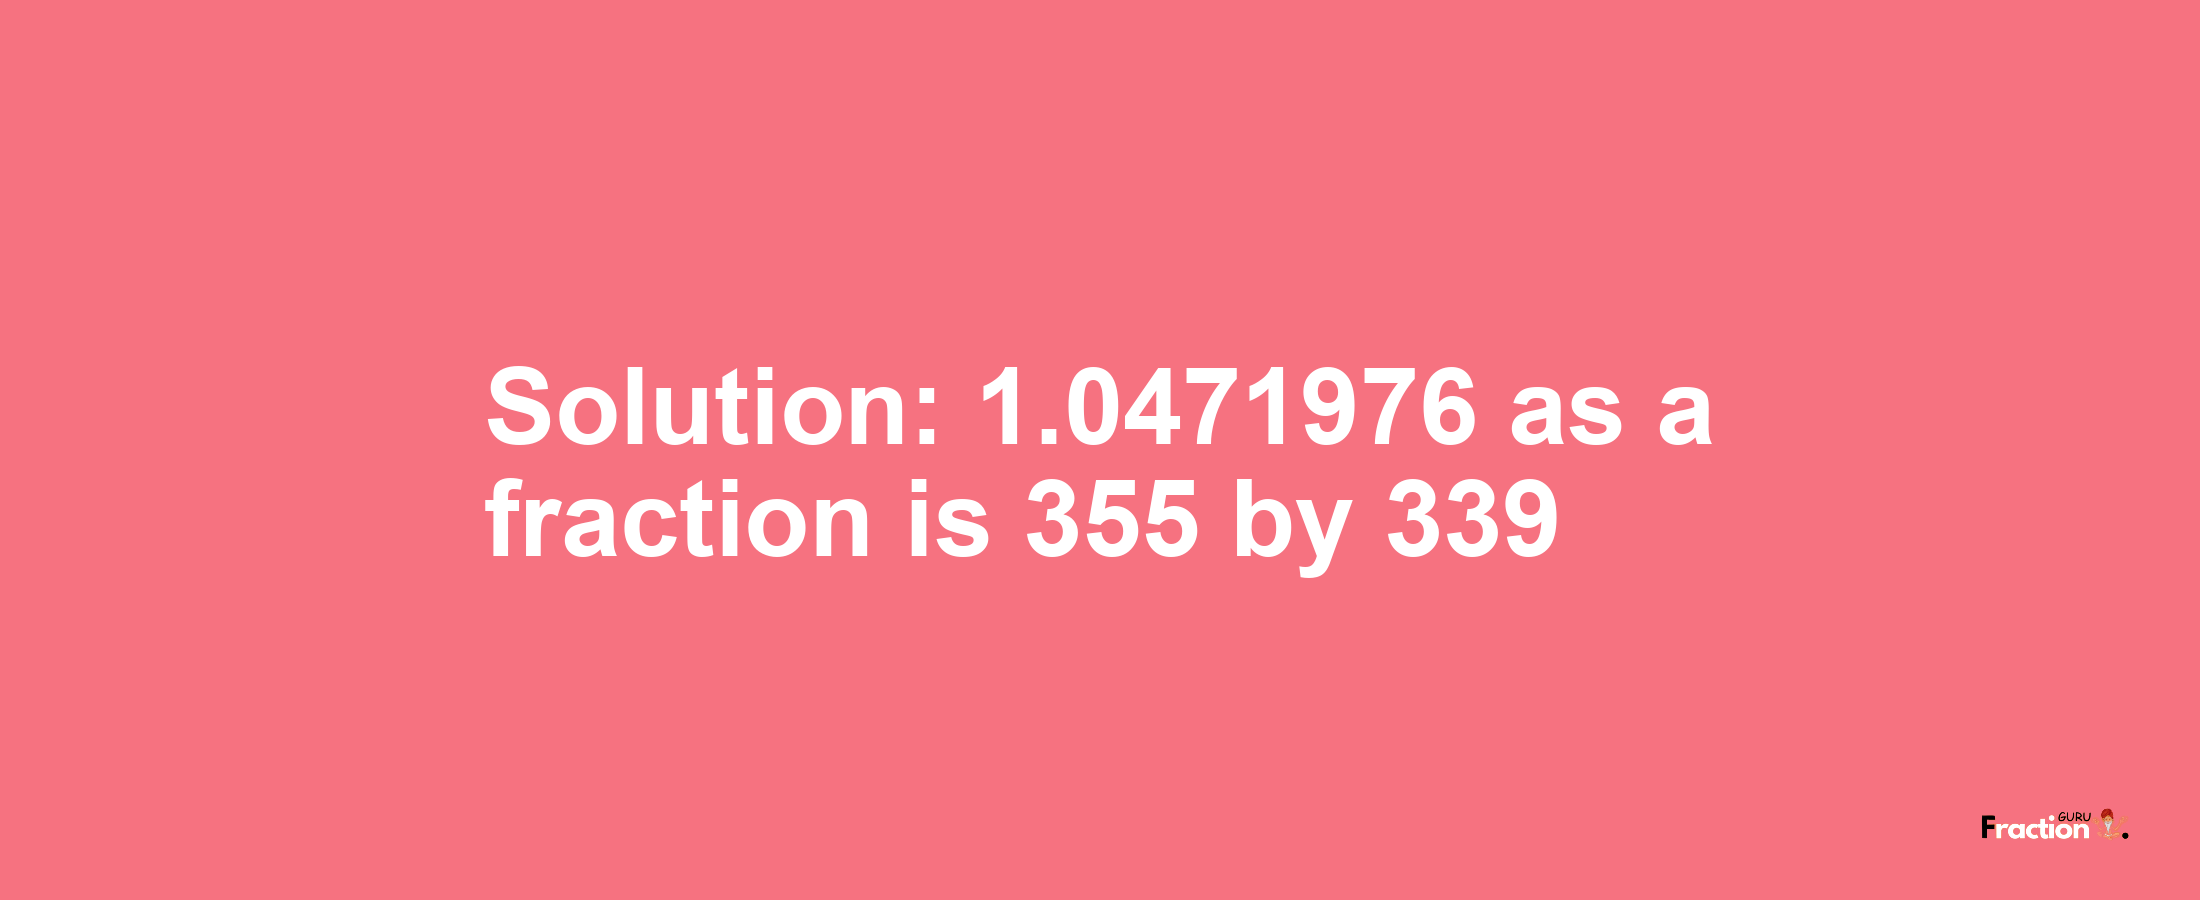 Solution:1.0471976 as a fraction is 355/339